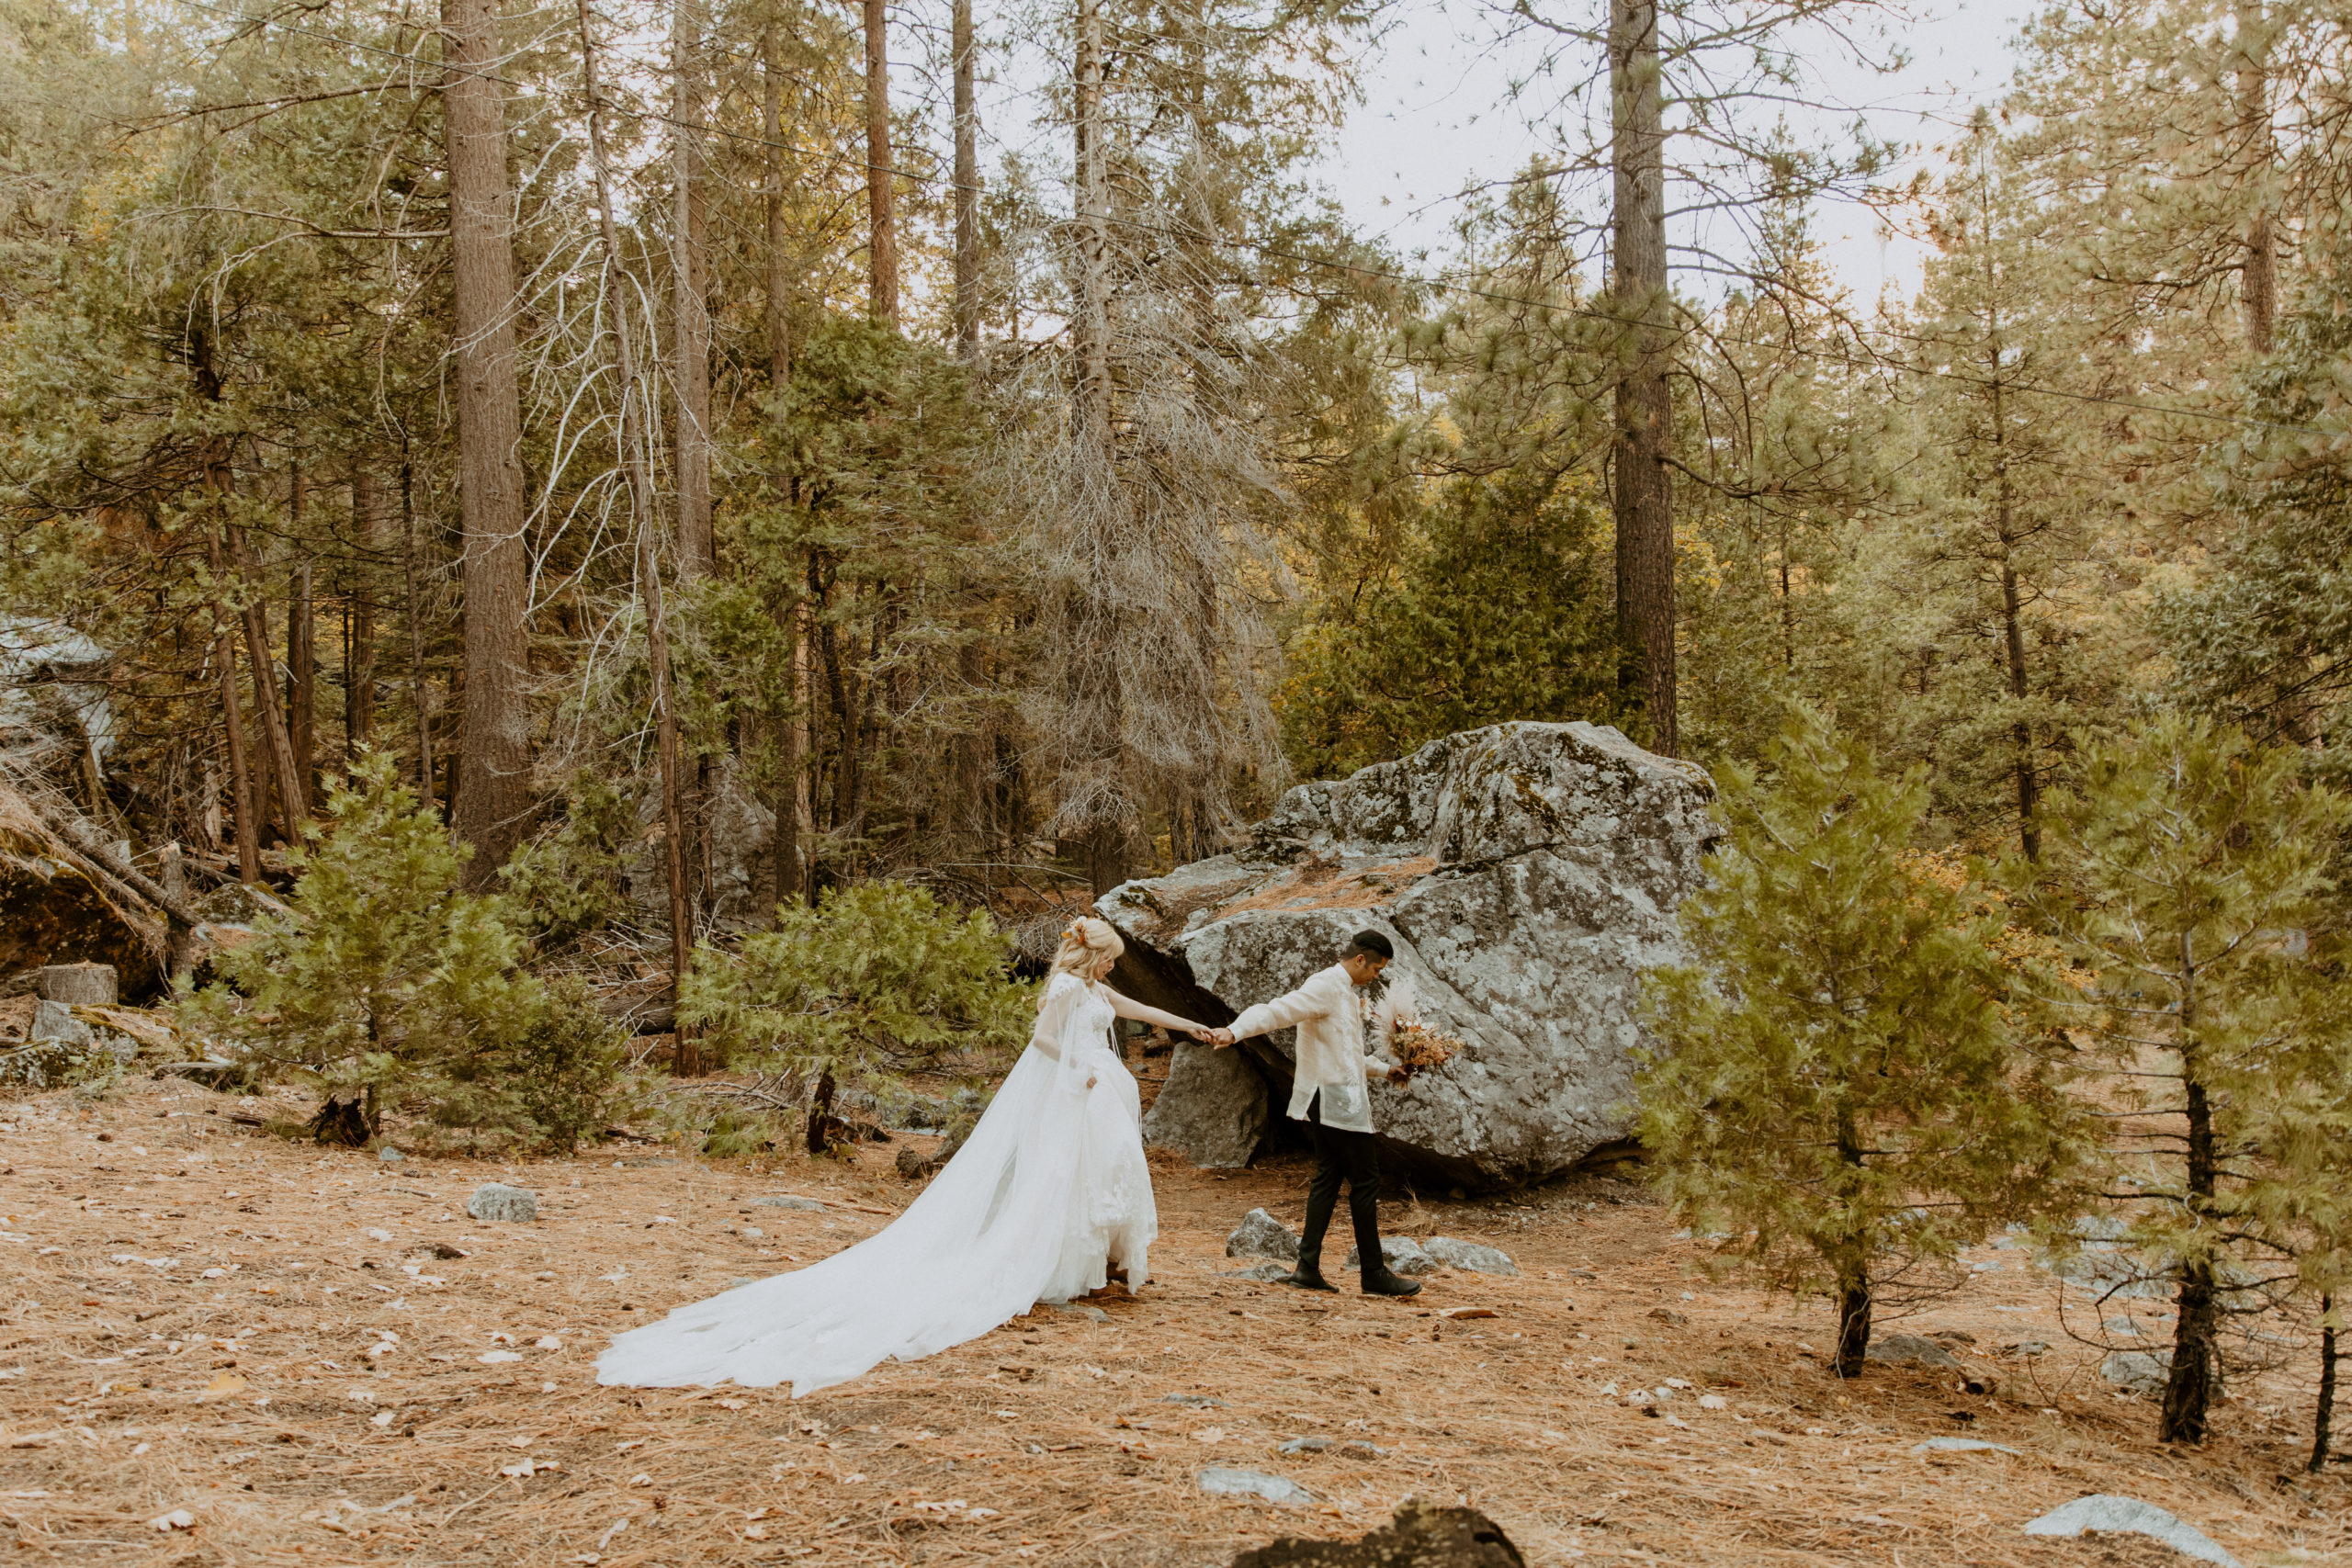 the couple walking through the forest during their elopement in Yosemite